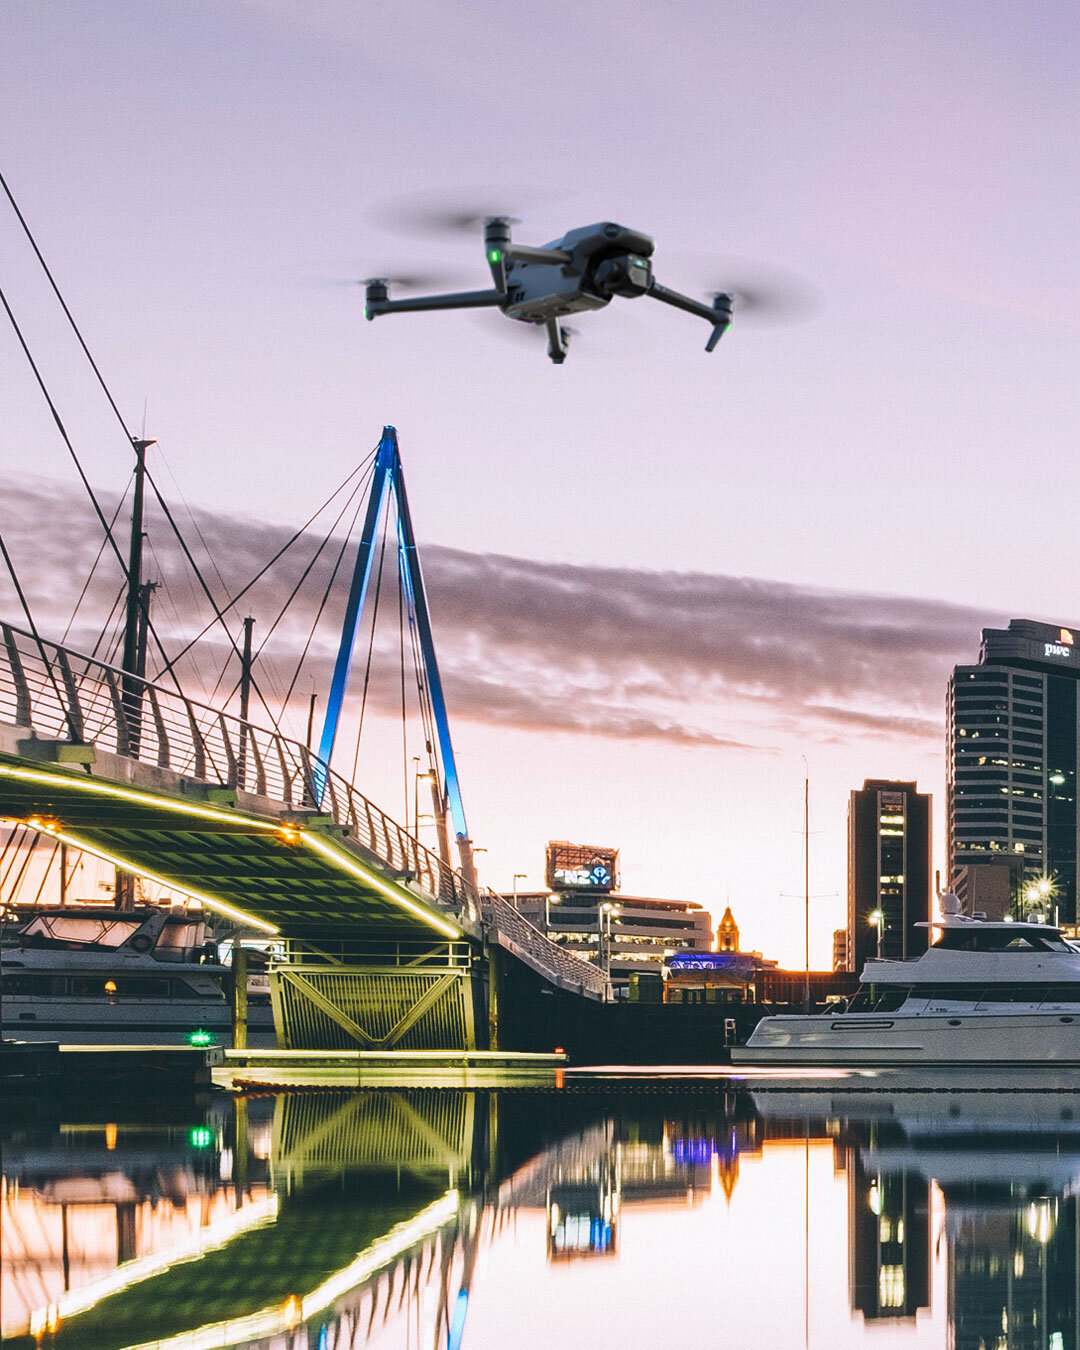 @worldofdronescongress is bringing together the next generation of innovators to our shores, and we're excited to be joining them! Heading to #WoDaRCNZ? Come chat with our team at stands 3 &amp; 4, and find out how we're transforming New Zealand with